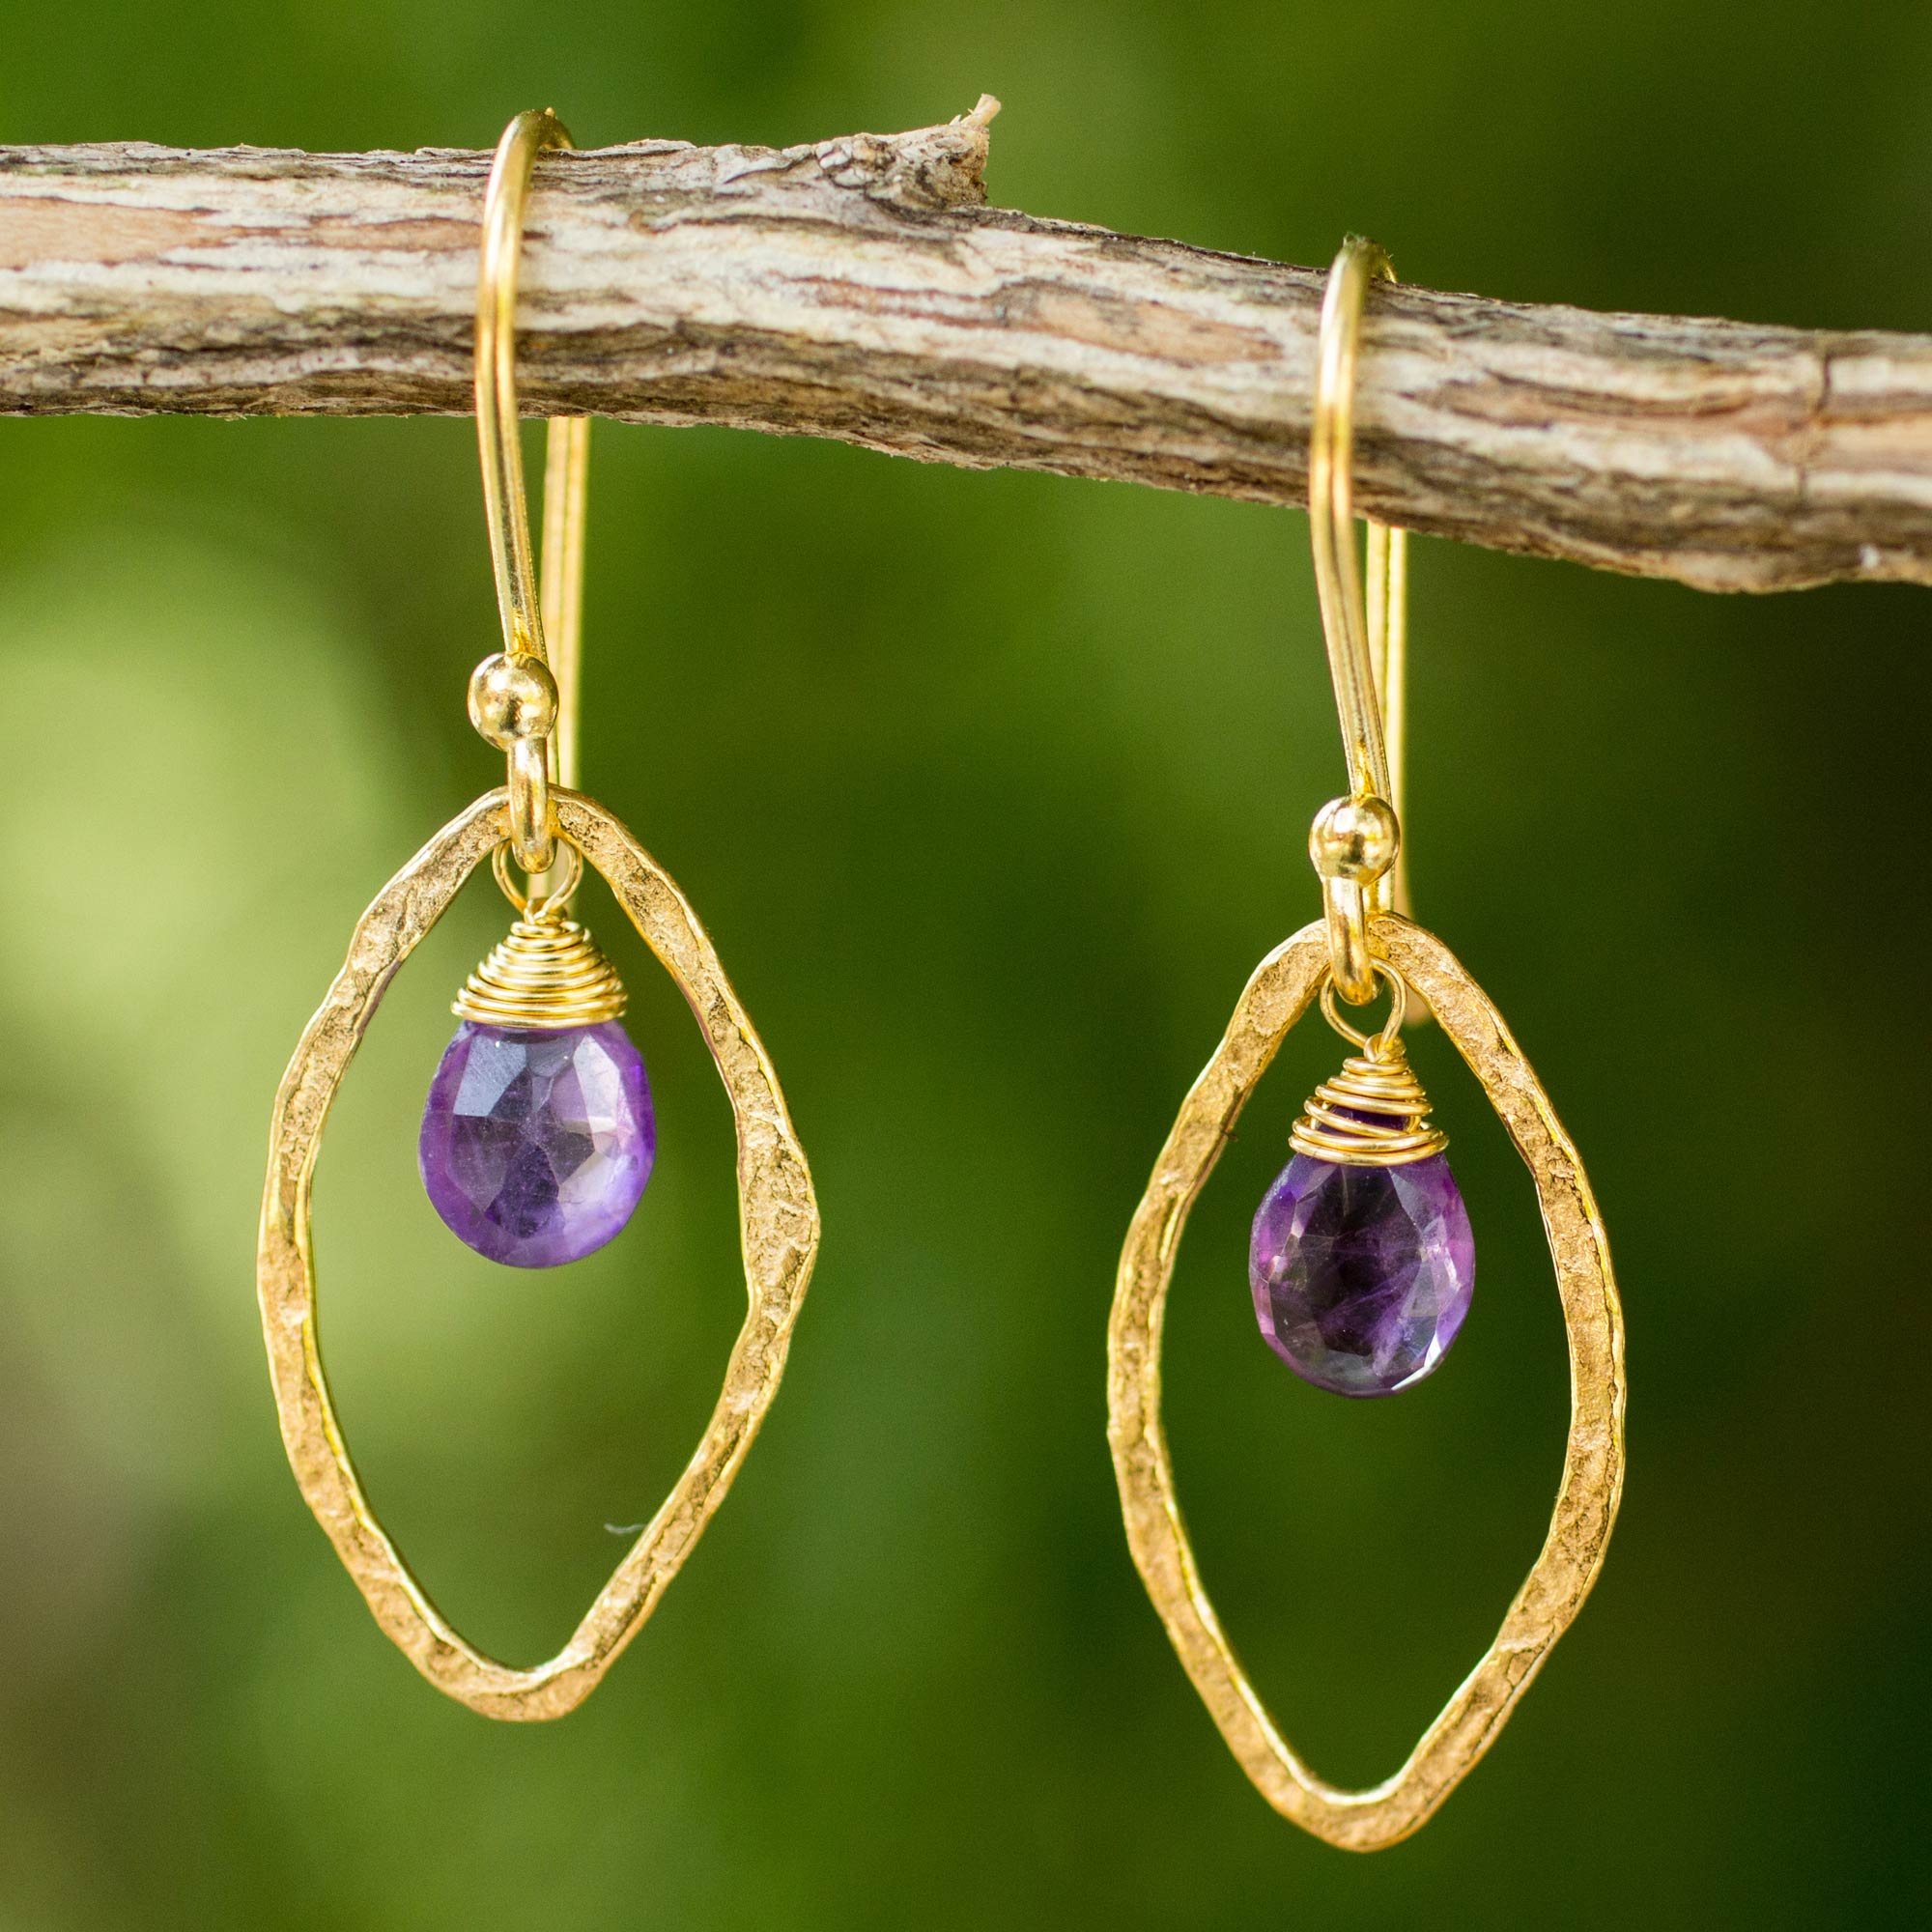 Gold Plated Handcrafted Earrings with Amethyst - Swinging Ellipses